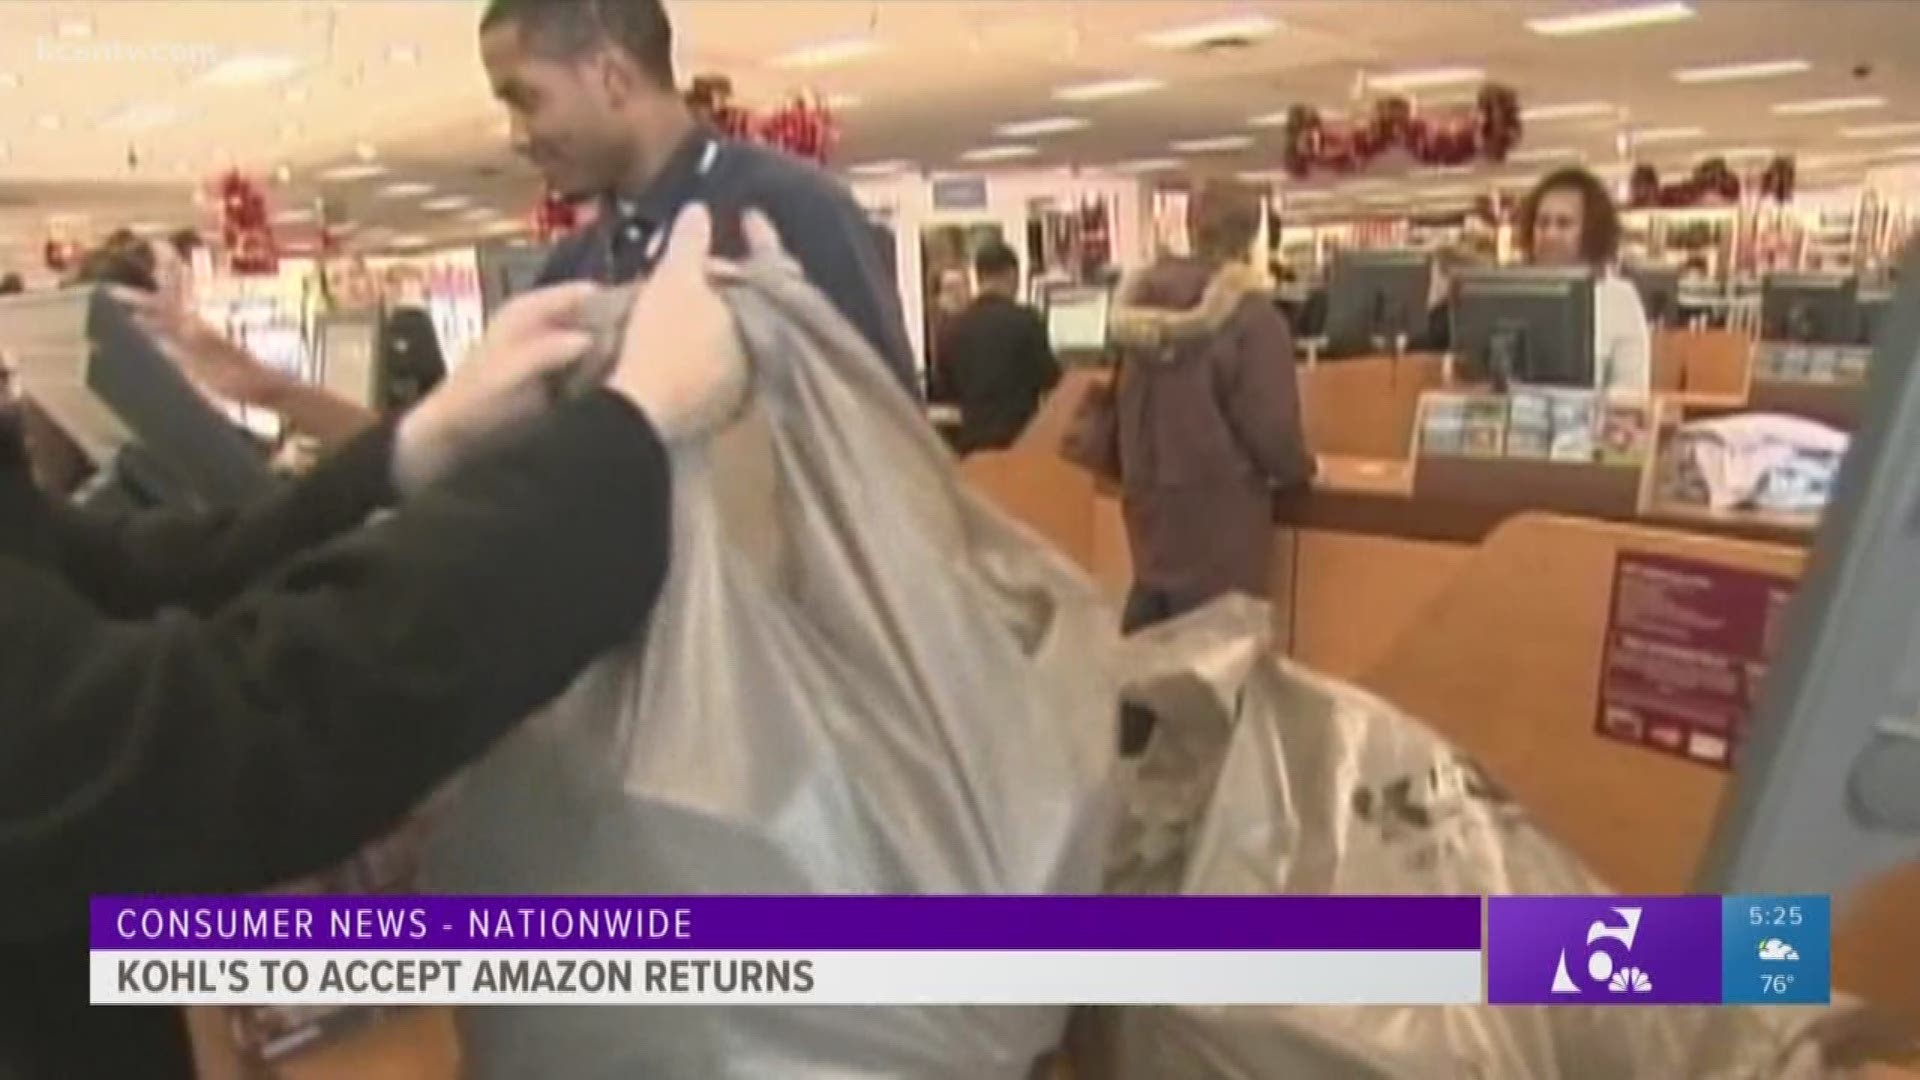 Starting in July, Amazon customers will now be able to return merchandise to Kohl's stores.